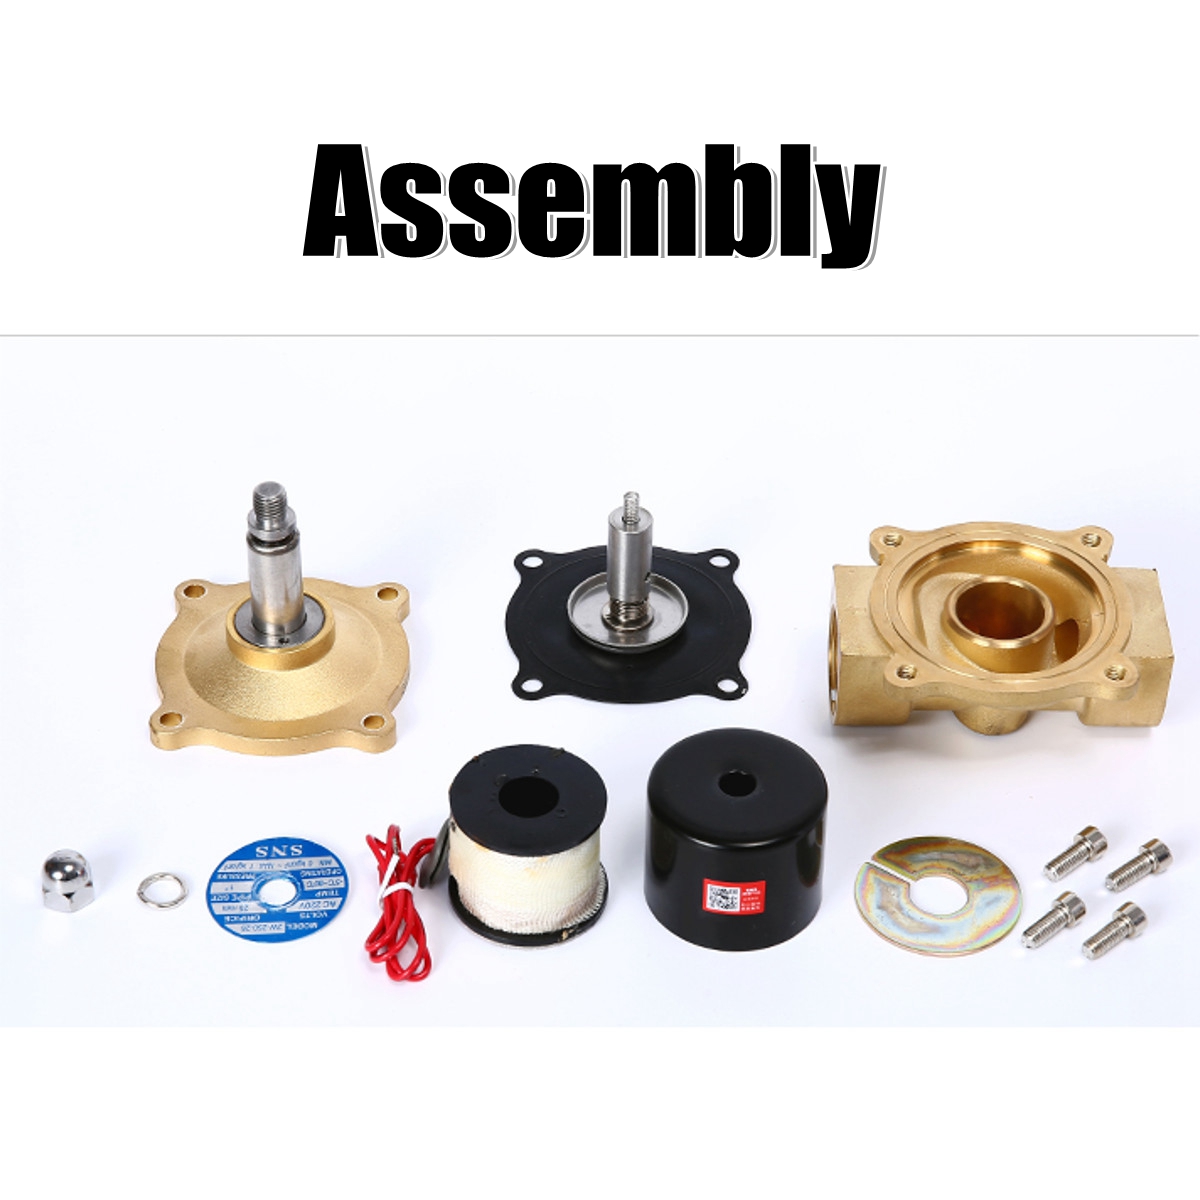 12-34-1-Inch-12V-Electric-Solenoid-Valve-Pneumatic-Valve-for-Water-Air-Gas-Brass-Valve-Air-Valves-1474540-7